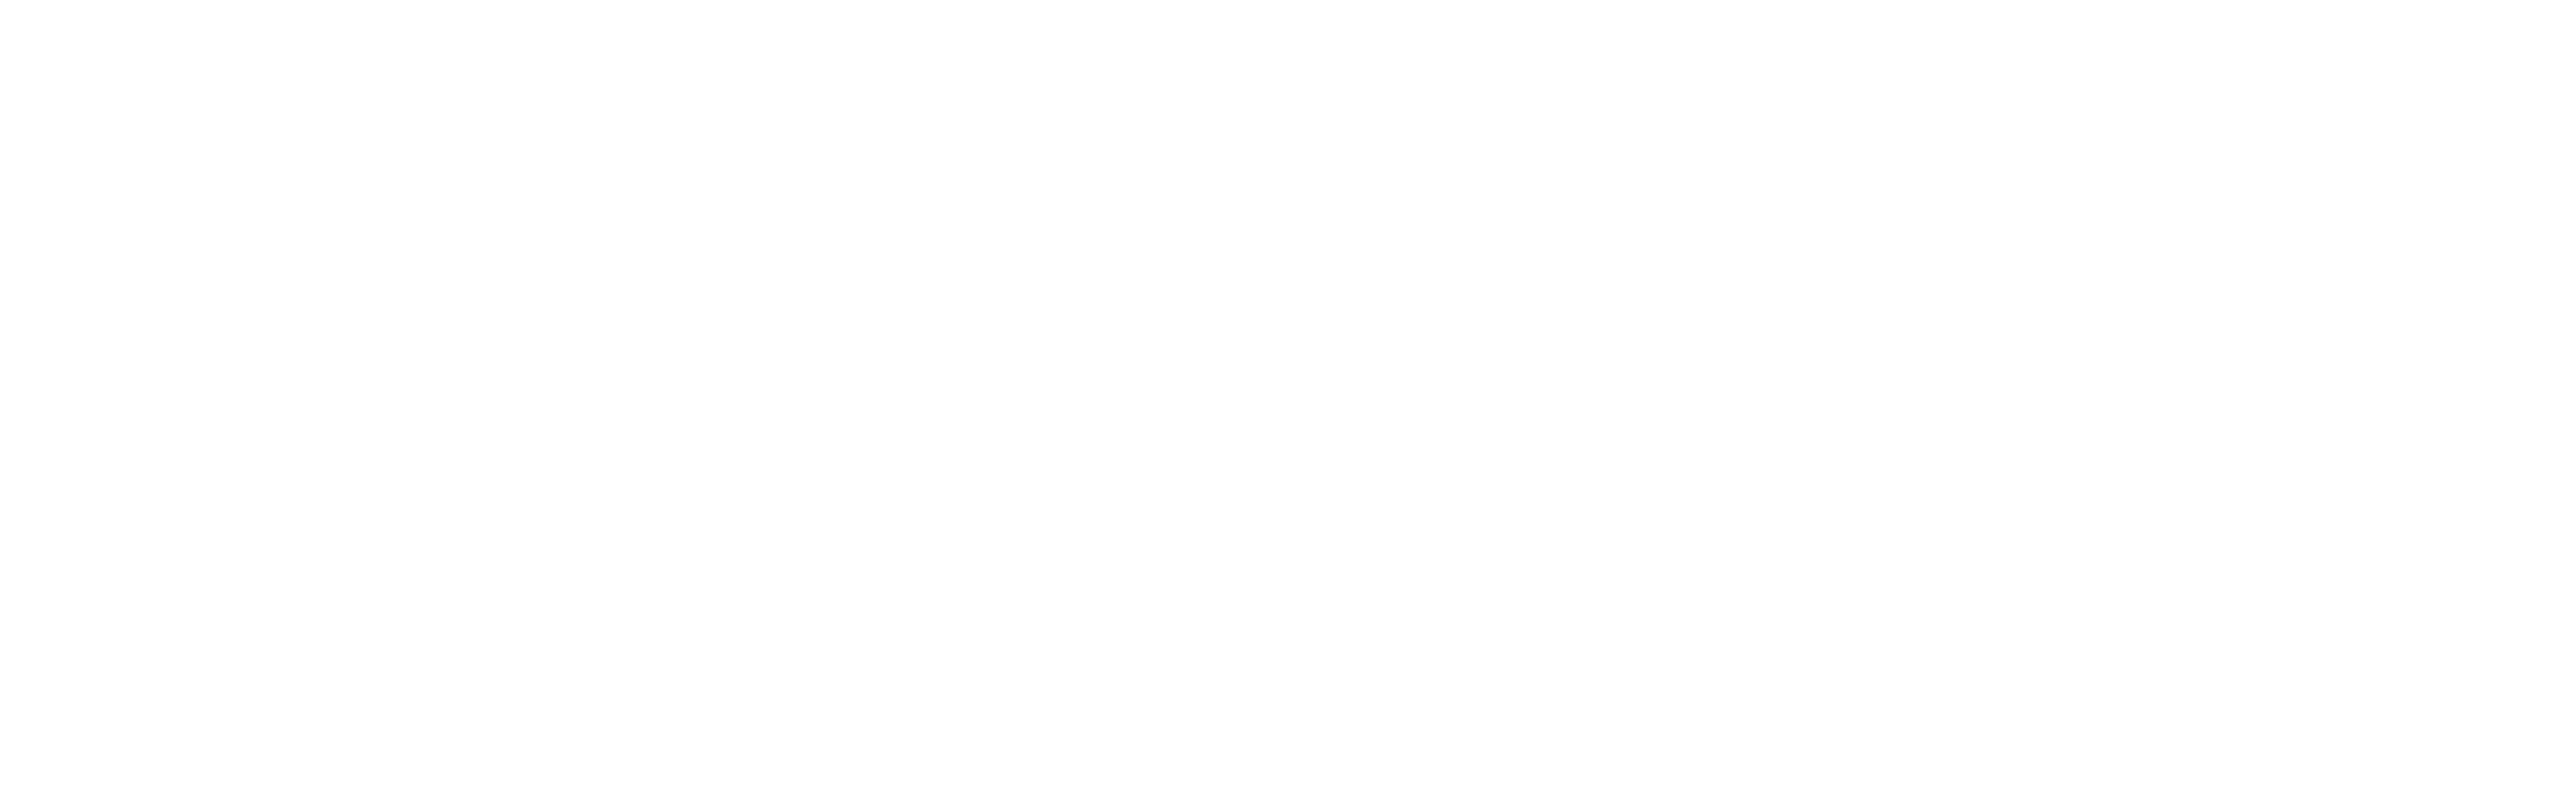 Connect Resources